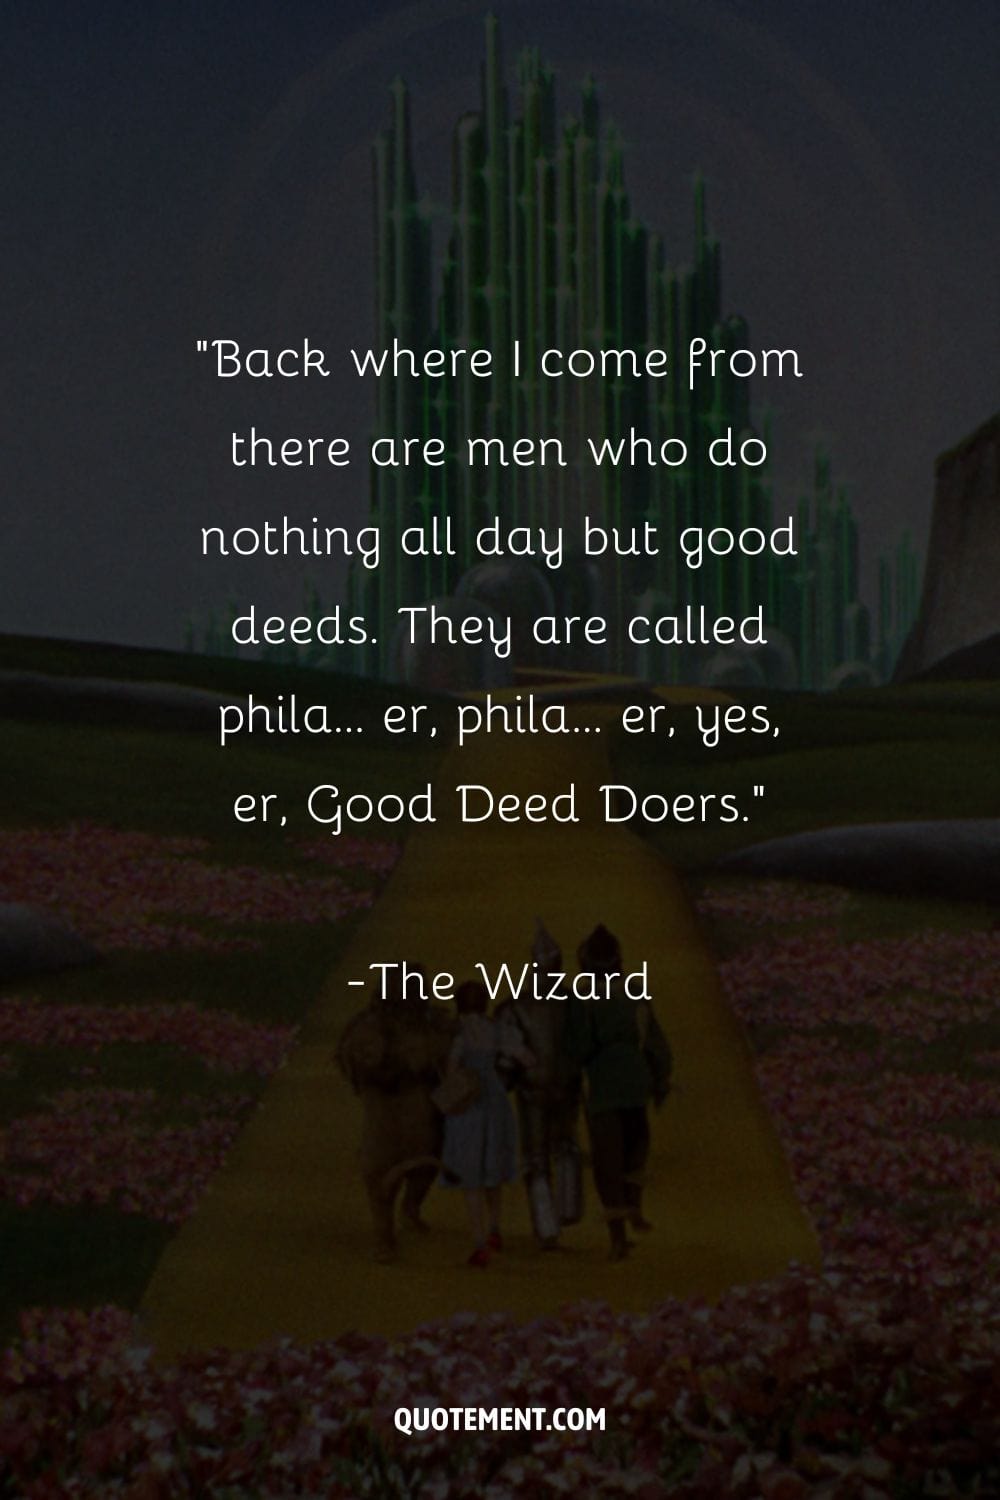 characters walking together through Oz representing the greatest Wizard of Oz quote
